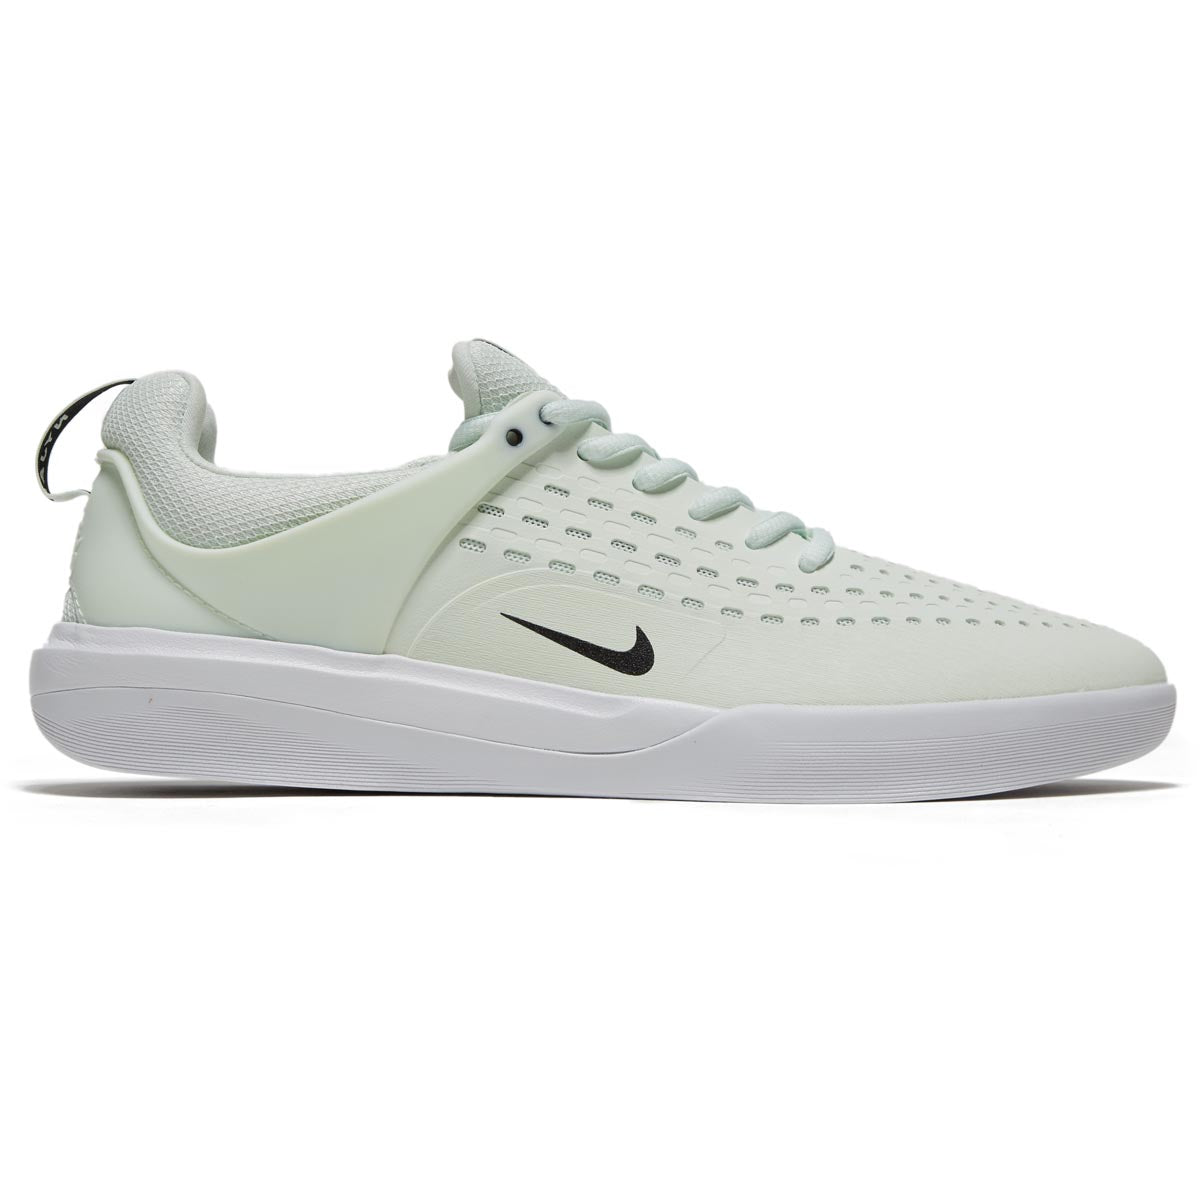 Nike SB Zoom Nyjah 3 Shoes - Barely Green/Black/Barely Green image 1